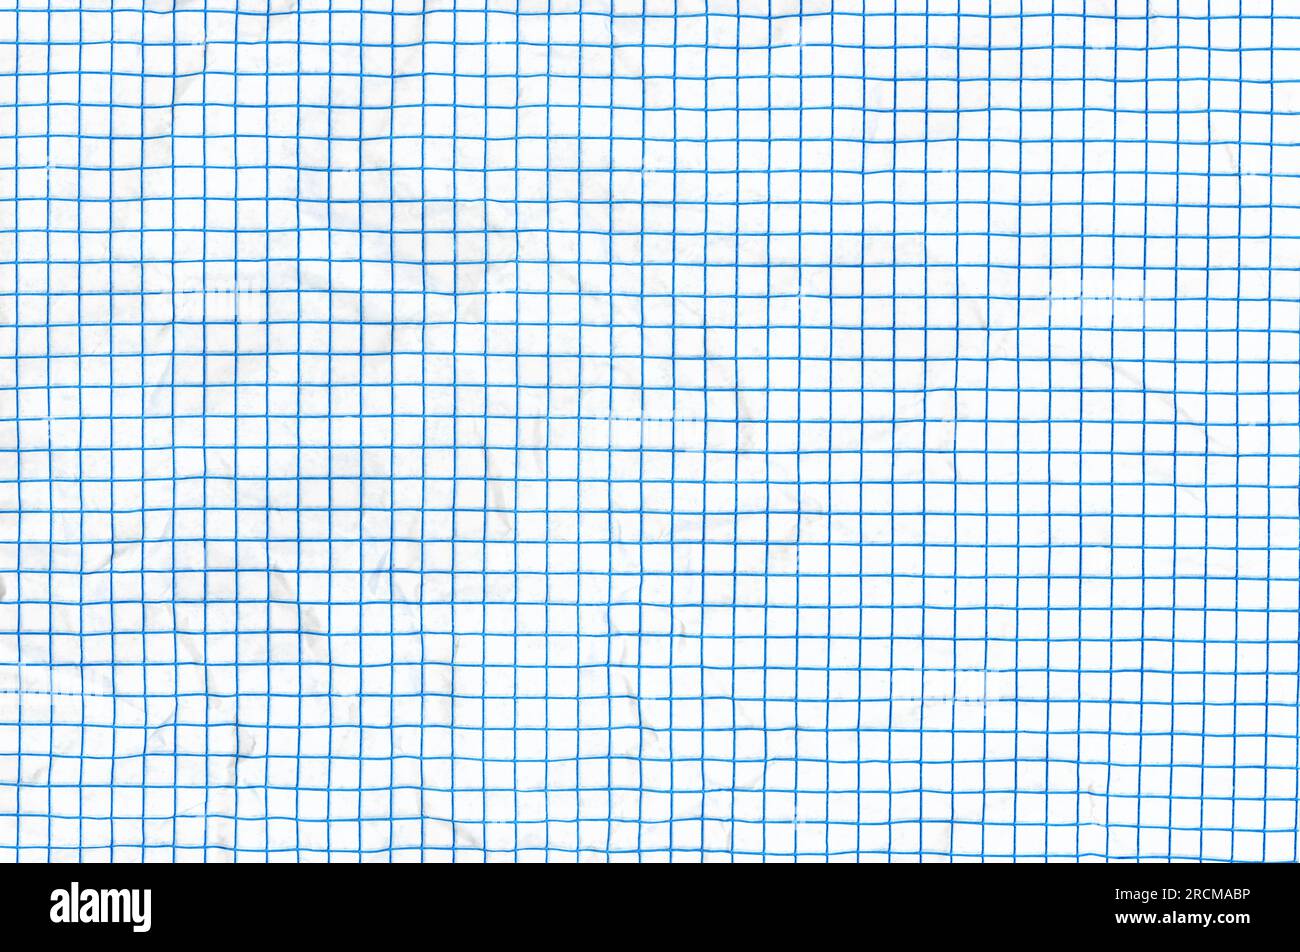 Crumpled blue lined graph or grid paper. Stock Photo